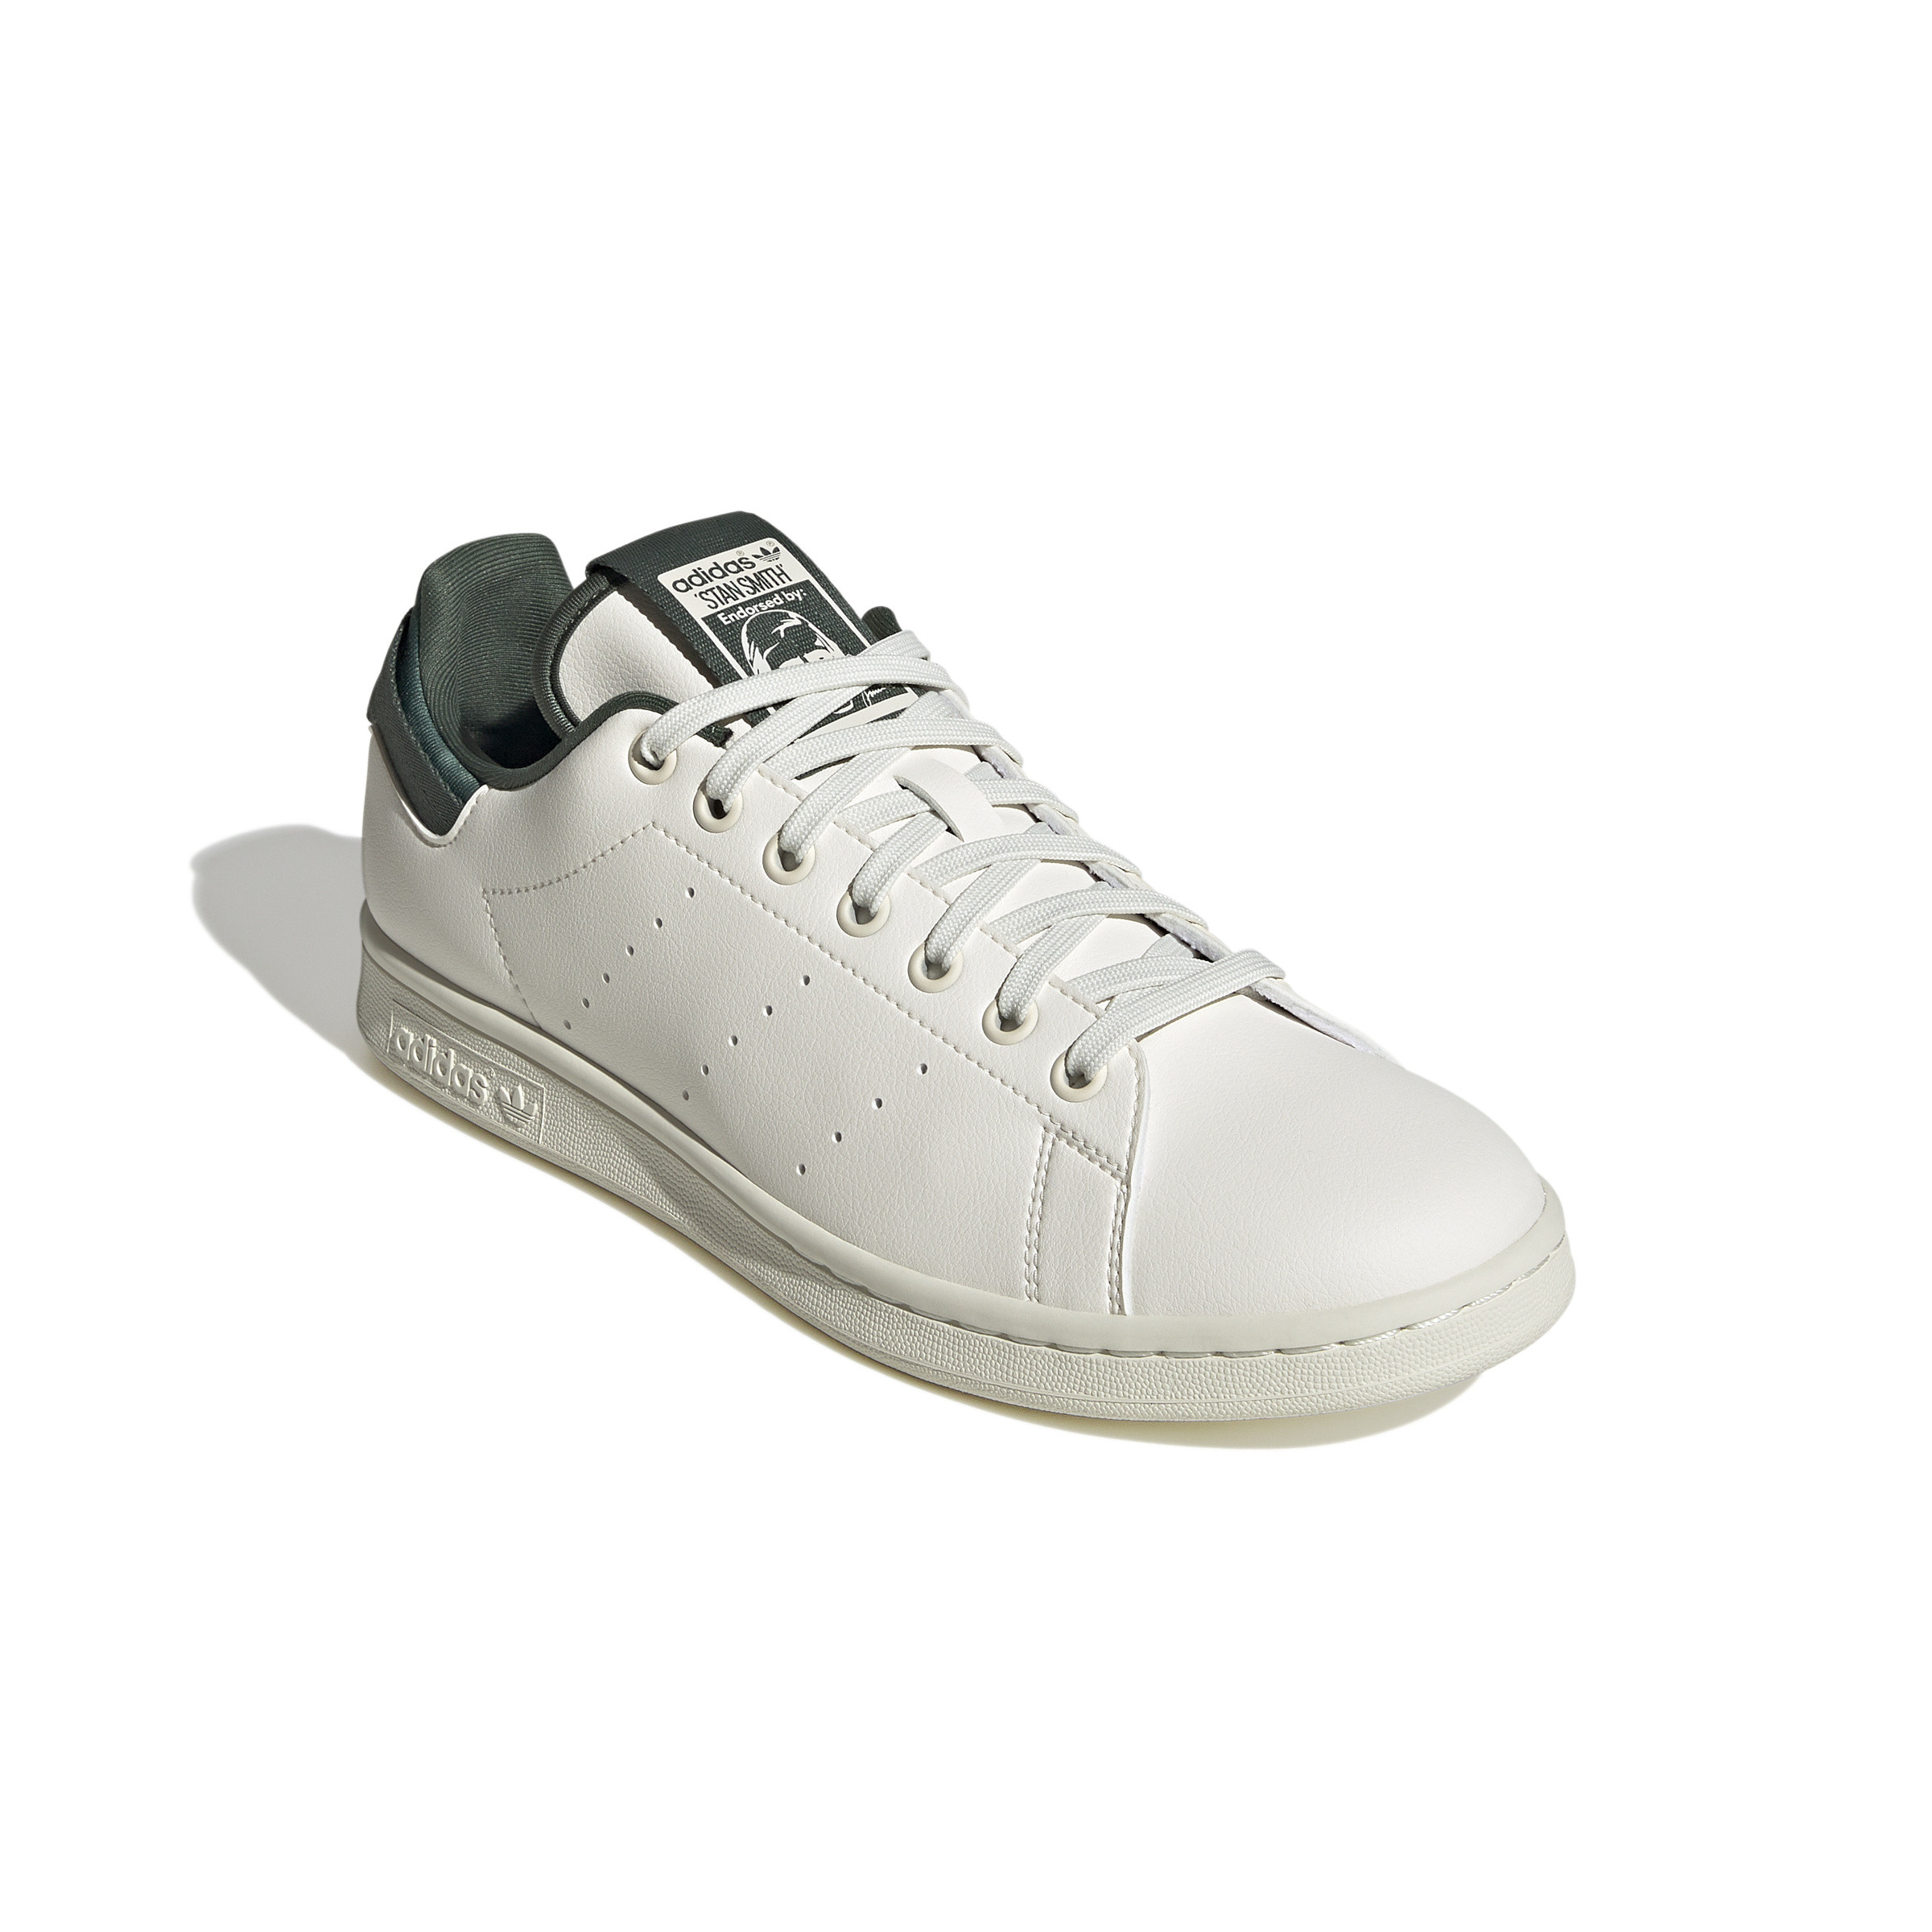 Adidas - Stan Smith Parley Shoes, White, large image number 4